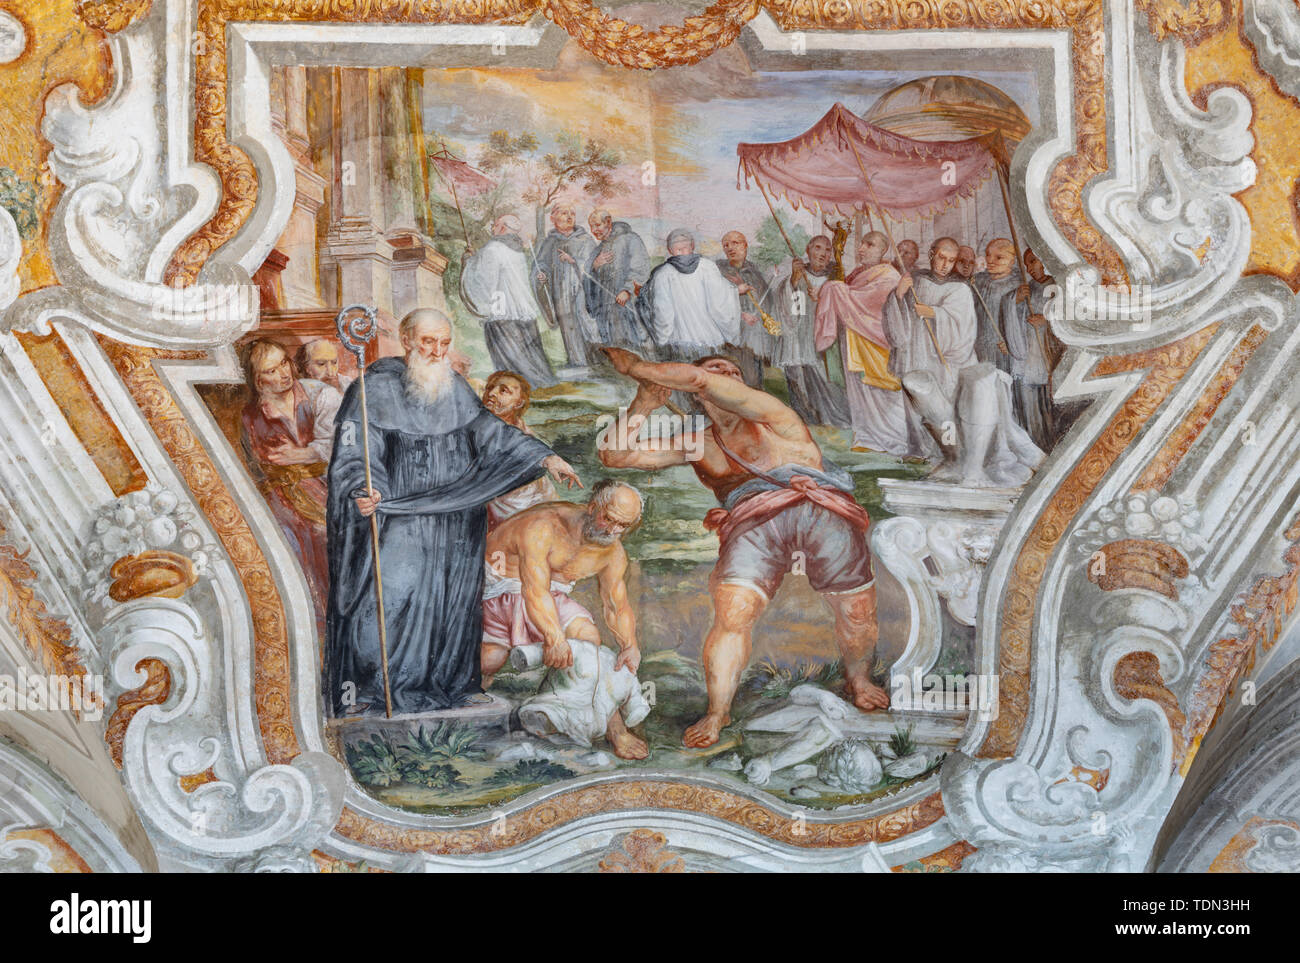 CATANIA, ITALY - APRIL 7, 2018: The vault fresco from live of Saint Benedict in church Chiesa di San Benedetto by Giovanni Tuccari (1667–1743). Stock Photo